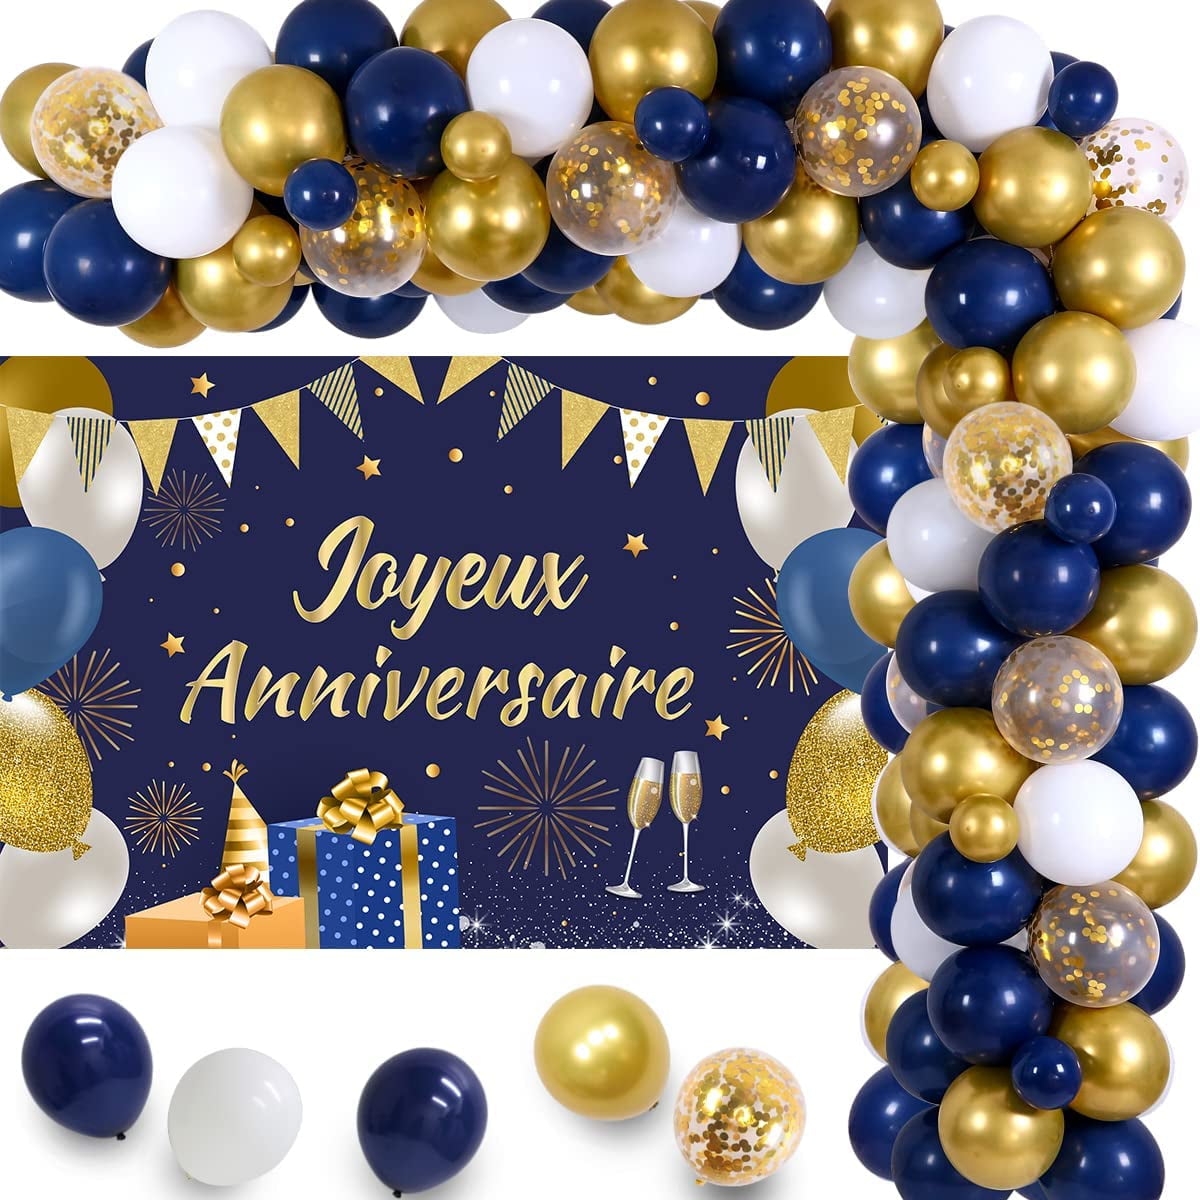 Birthday Navy Blue Gold Decorations Gifts Stock Photo 1443191672